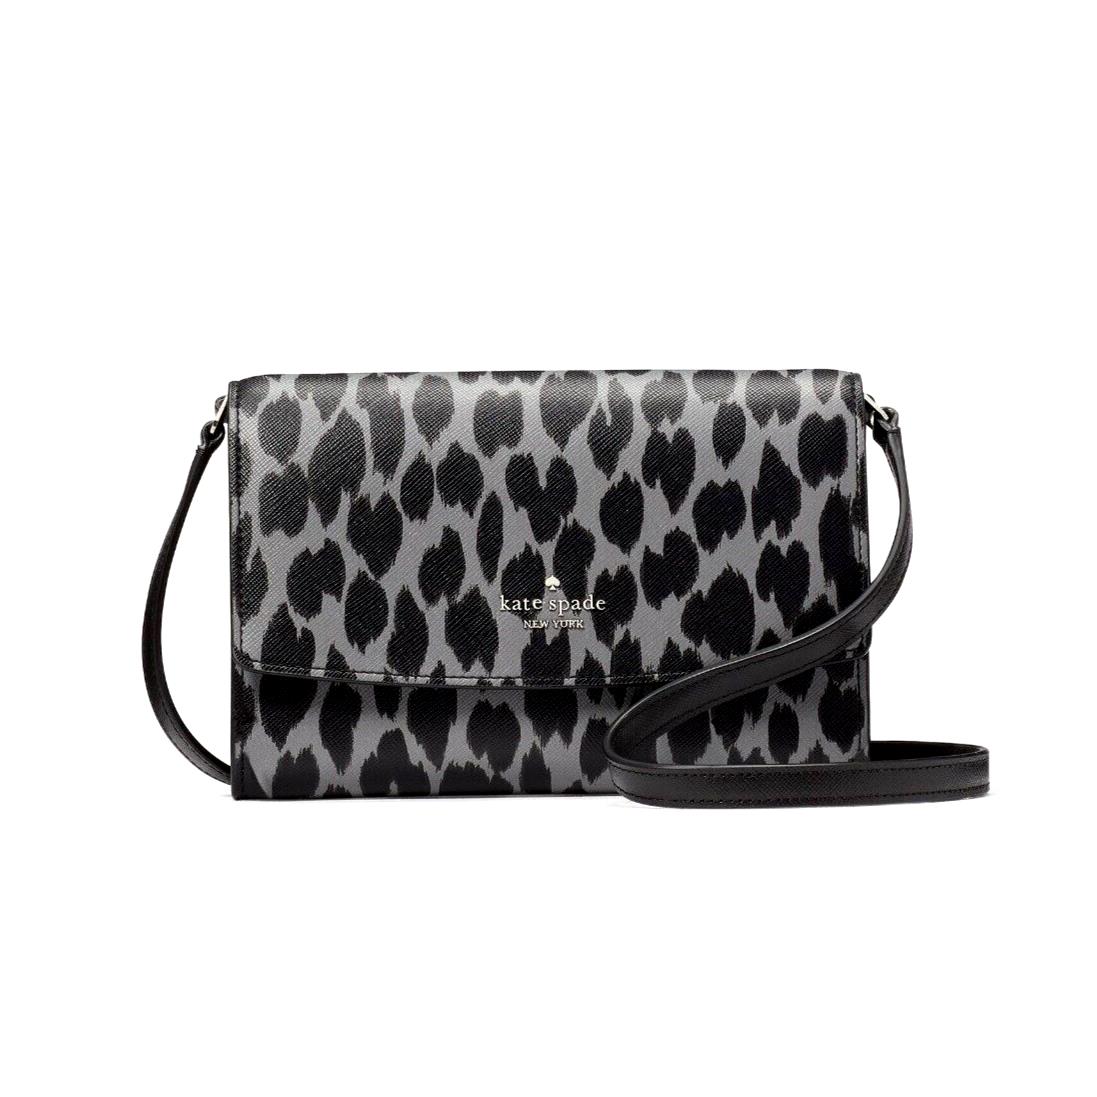 New Kate Spade Perry Crossbody Spotted Animal Printed Grey Multi